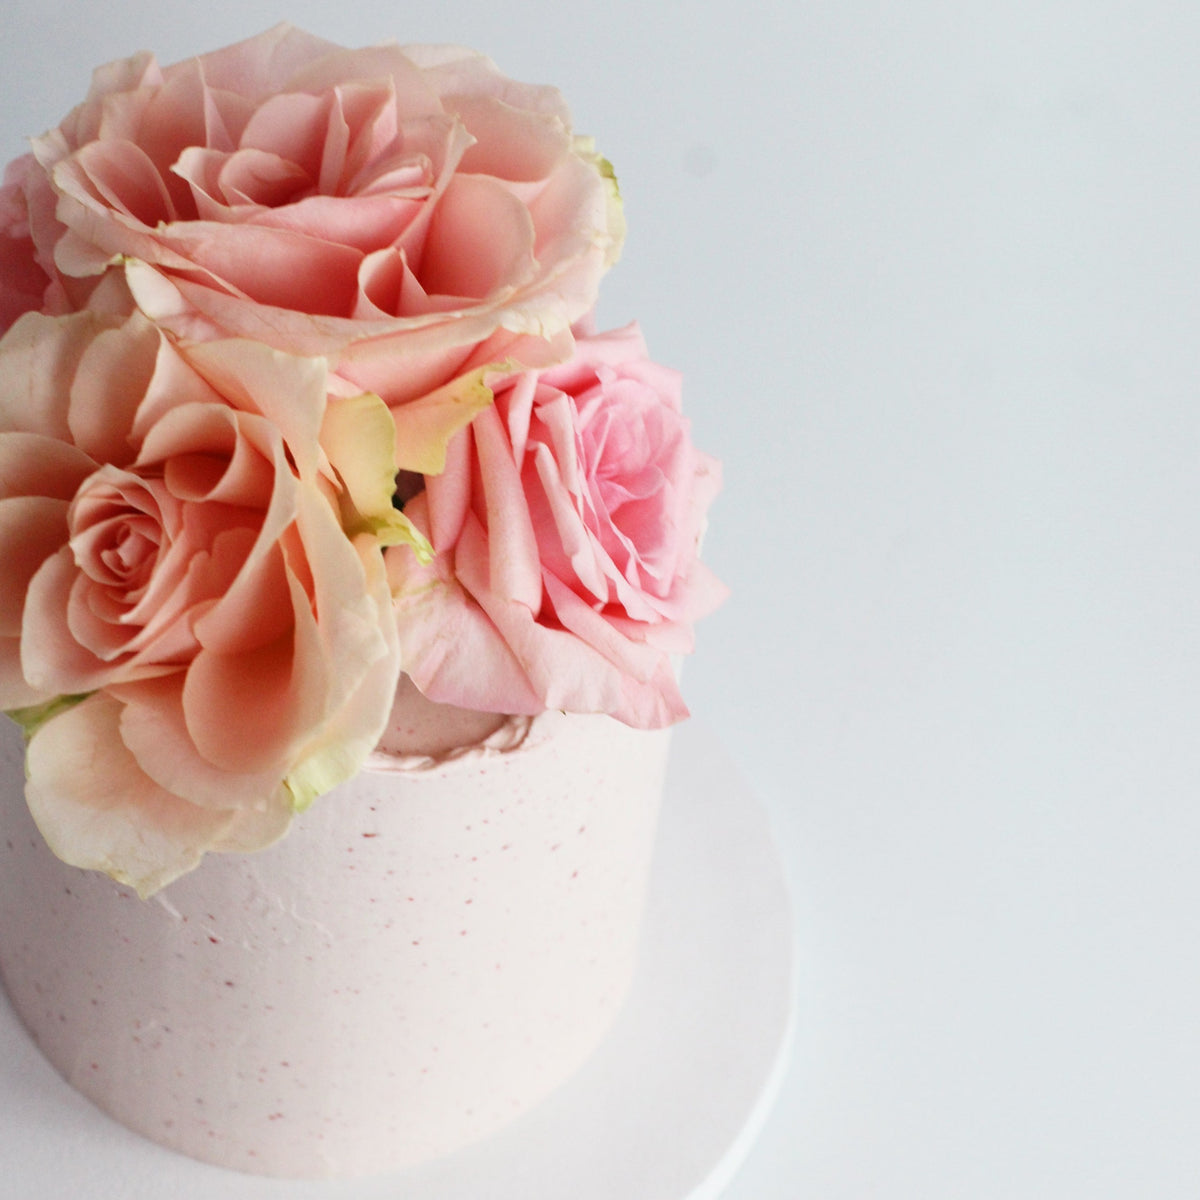 Our seasonal Rosie Cake iced with raspberry cream and topped with fresh roses!